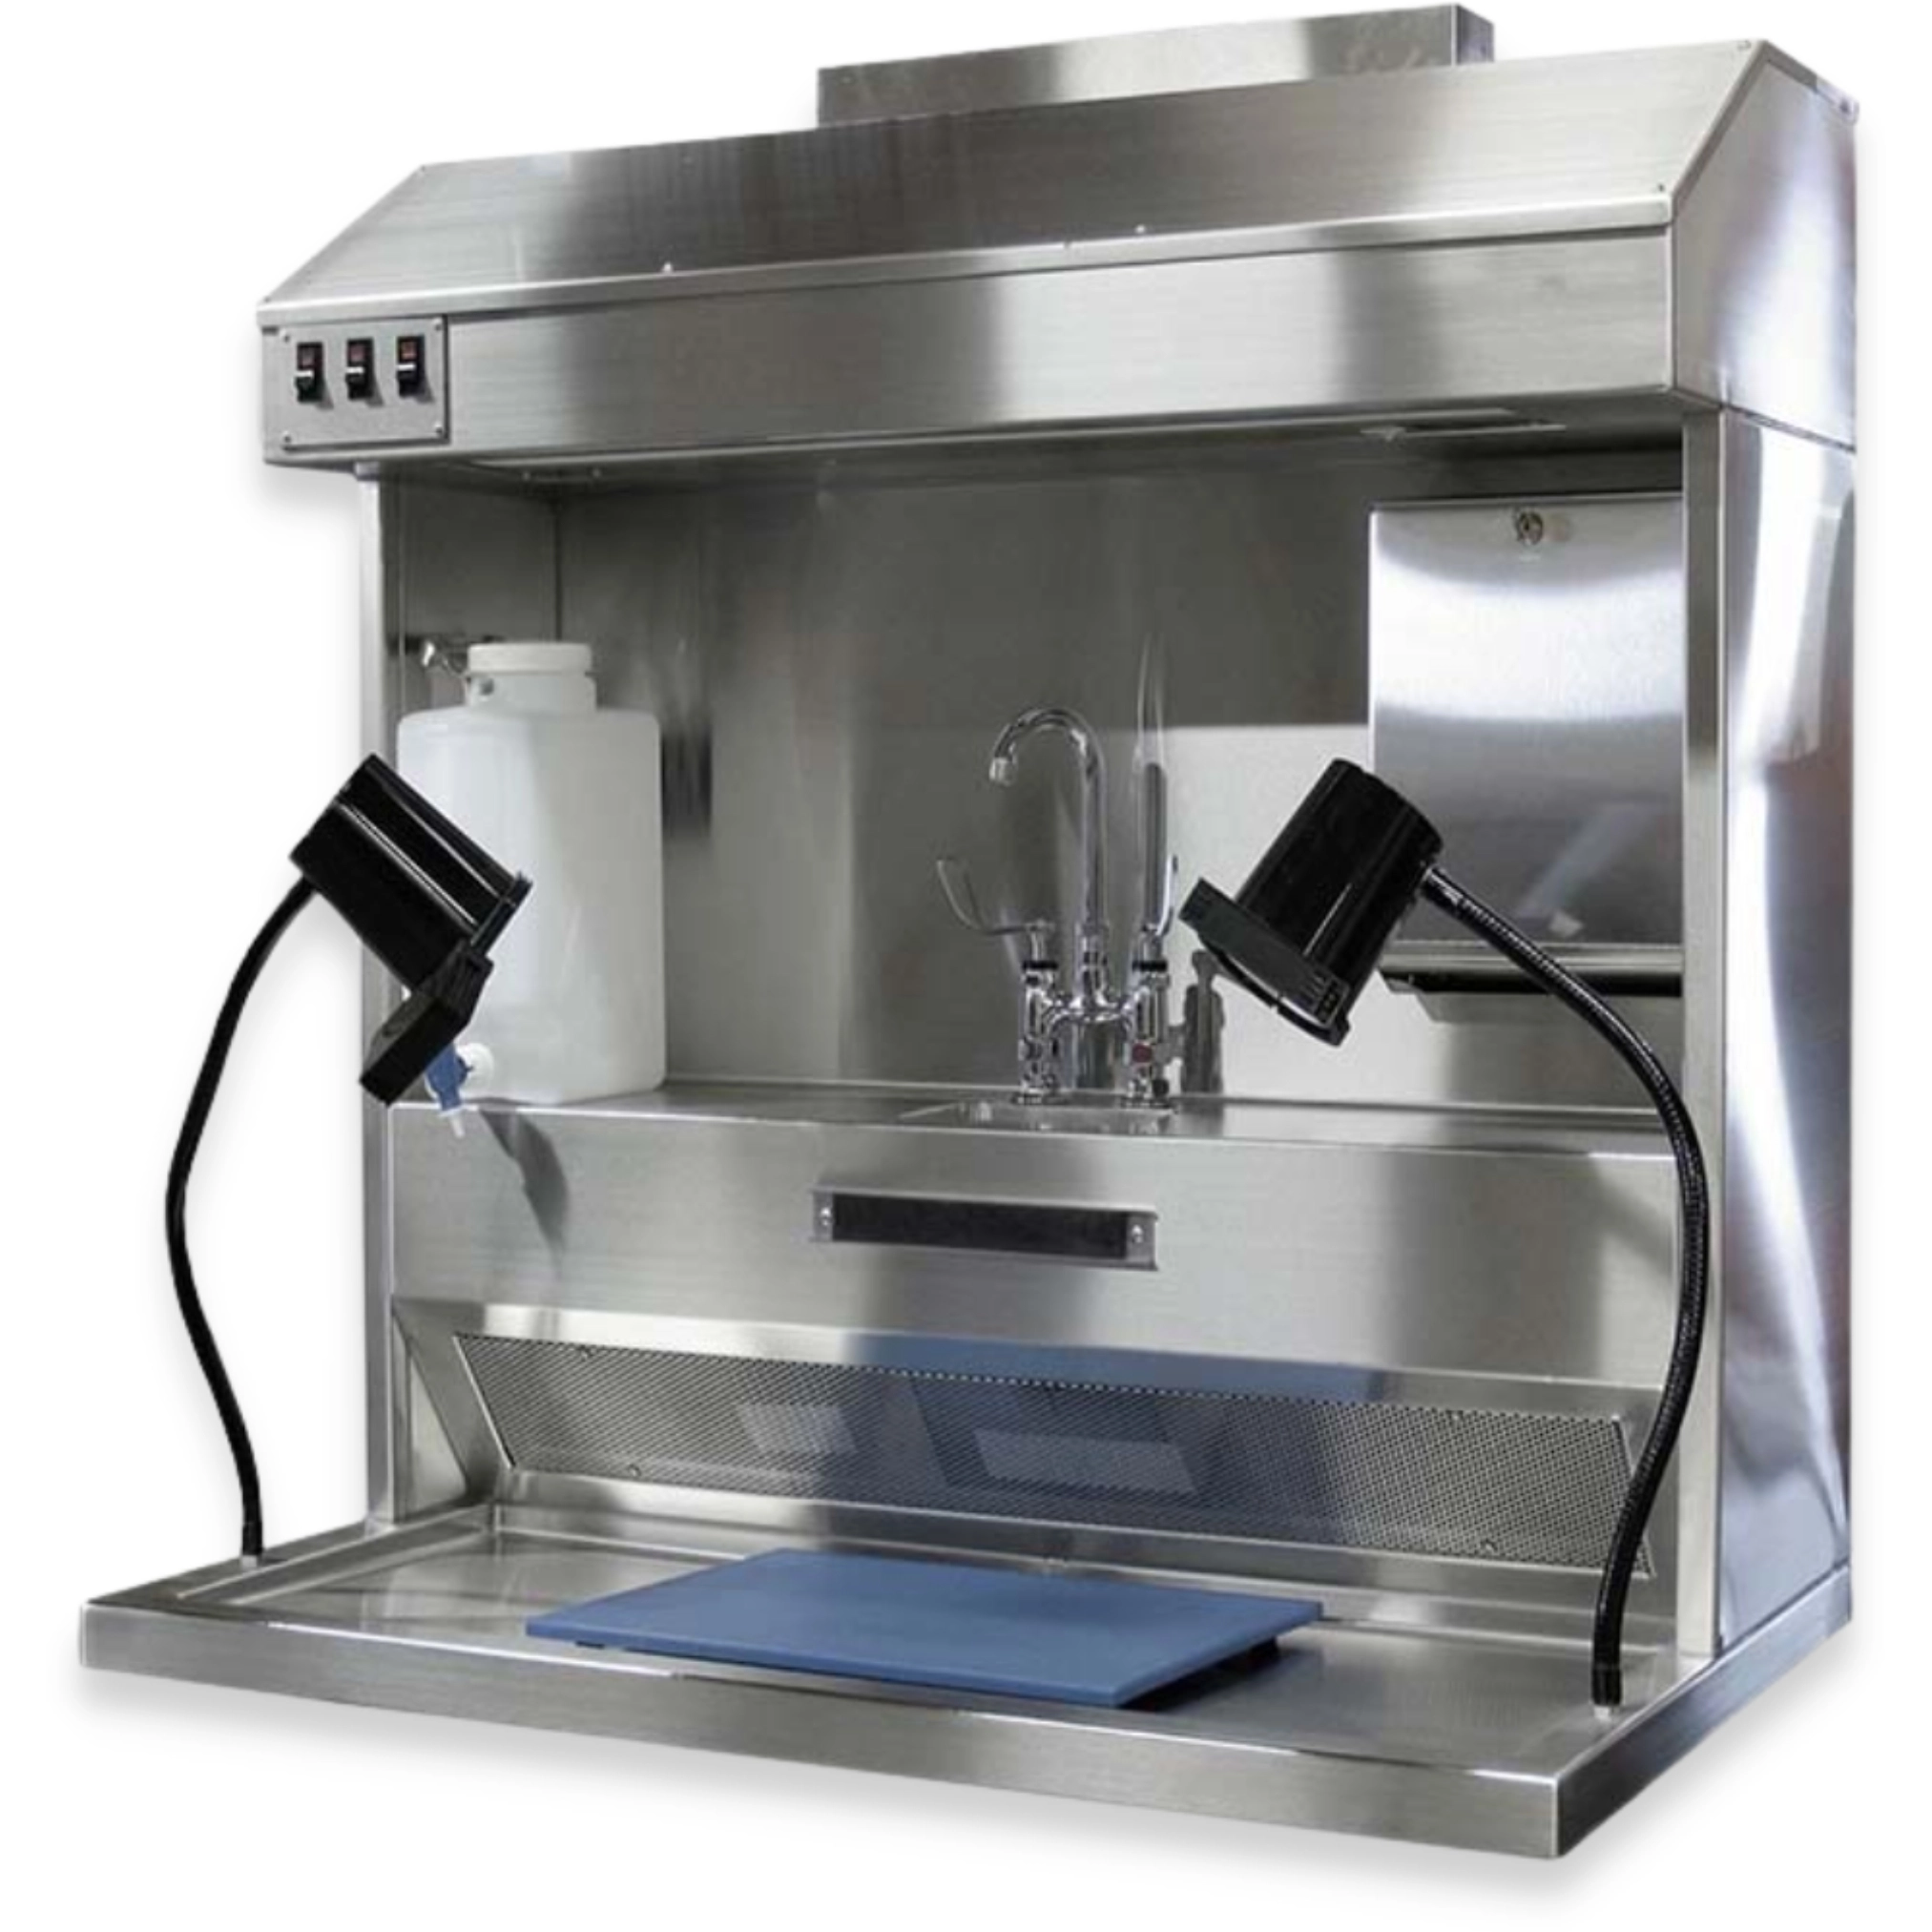 Mortech GL110 Countertop Pathology Grossing Station